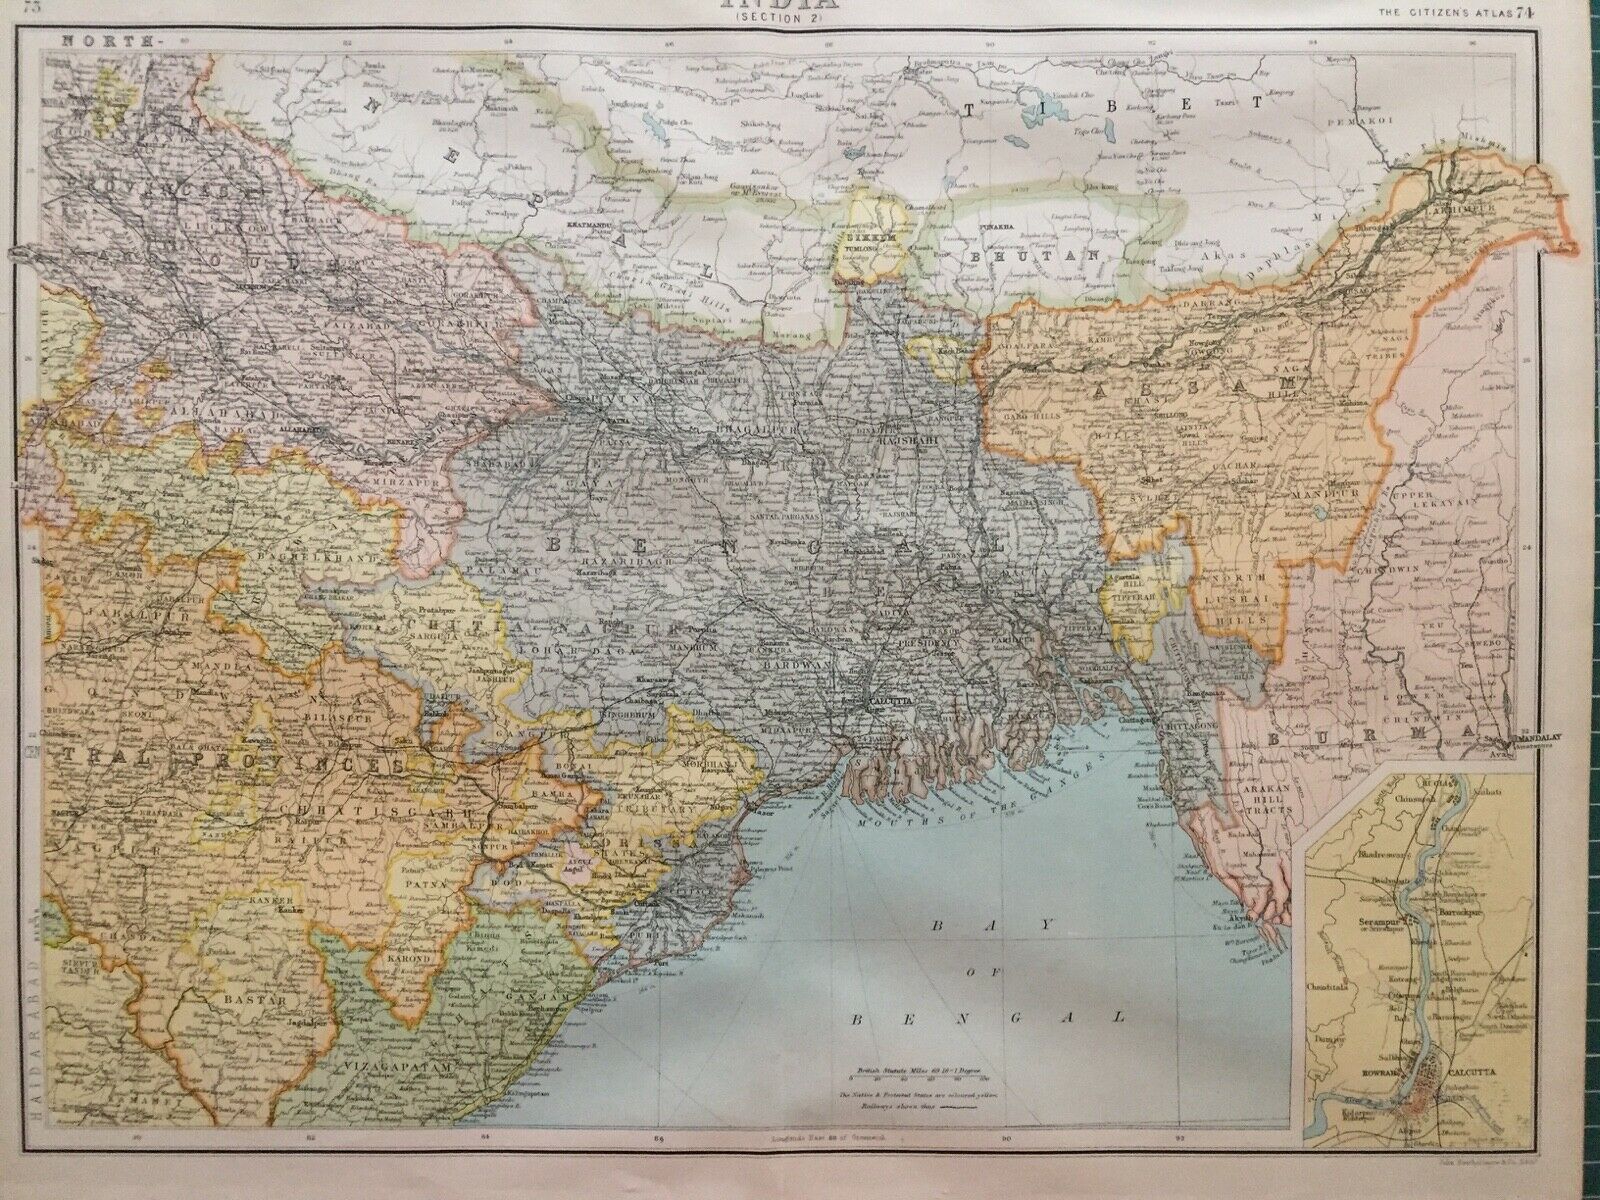 A map showing Sikkim and Burma c. 1900.